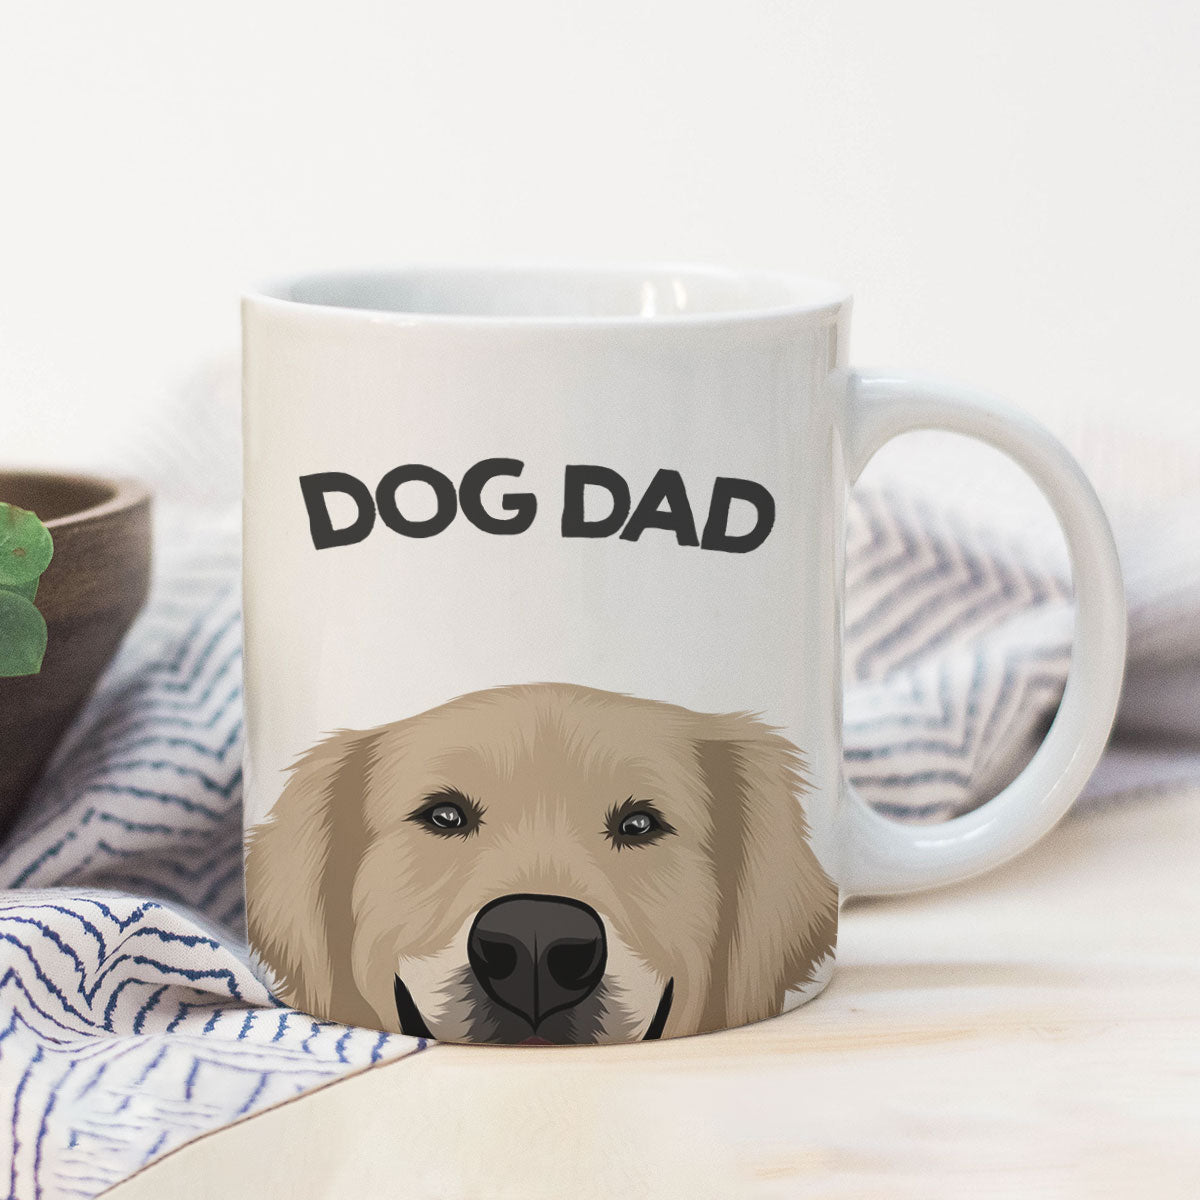 Custom Dog Dad Mug - Your Dog Picture - Father's Day, Birthday or Any Day Great Gift for Dad